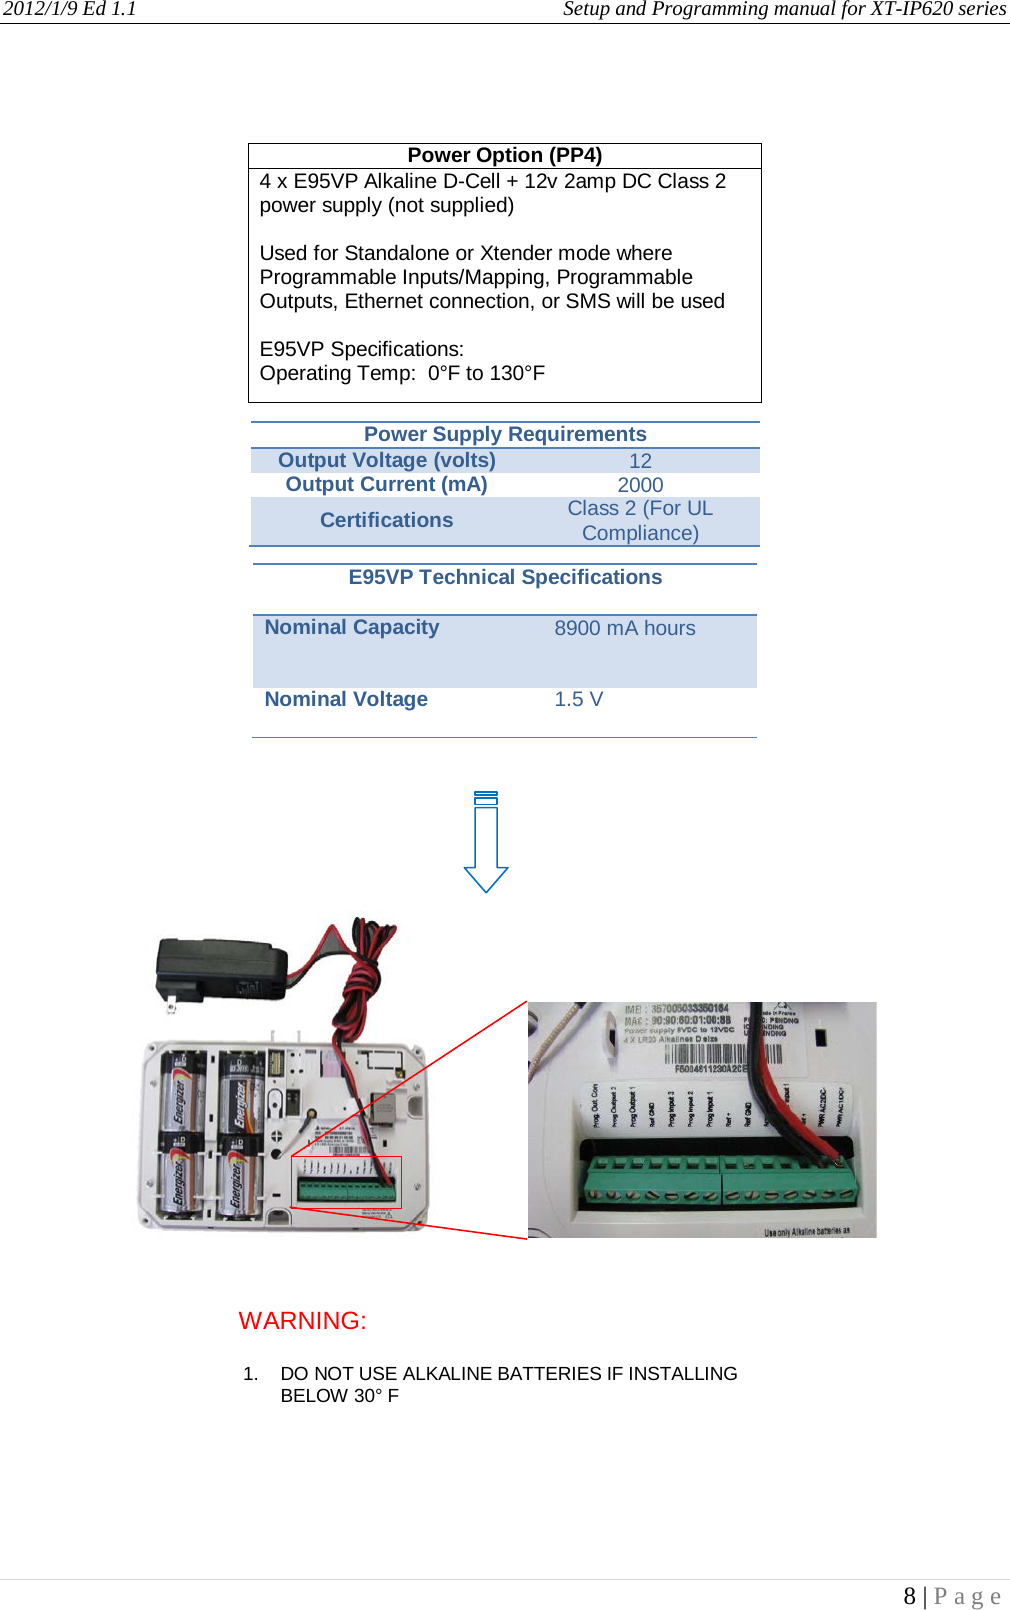 2012/1/9 Ed 1.1     Setup and Programming manual for XT-IP620 series   8 | Page                                 Power Option (PP4) 4 x E95VP Alkaline D-Cell + 12v 2amp DC Class 2 power supply (not supplied)  Used for Standalone or Xtender mode where Programmable Inputs/Mapping, Programmable Outputs, Ethernet connection, or SMS will be used  E95VP Specifications: Operating Temp:  0°F to 130°F Power Supply Requirements Output Voltage (volts) 12 Output Current (mA) 2000 Certifications Class 2 (For UL Compliance) E95VP Technical Specifications Nominal Capacity 8900 mA hours Nominal Voltage 1.5 V WARNING:    1. DO NOT USE ALKALINE BATTERIES IF INSTALLING BELOW 30° F    